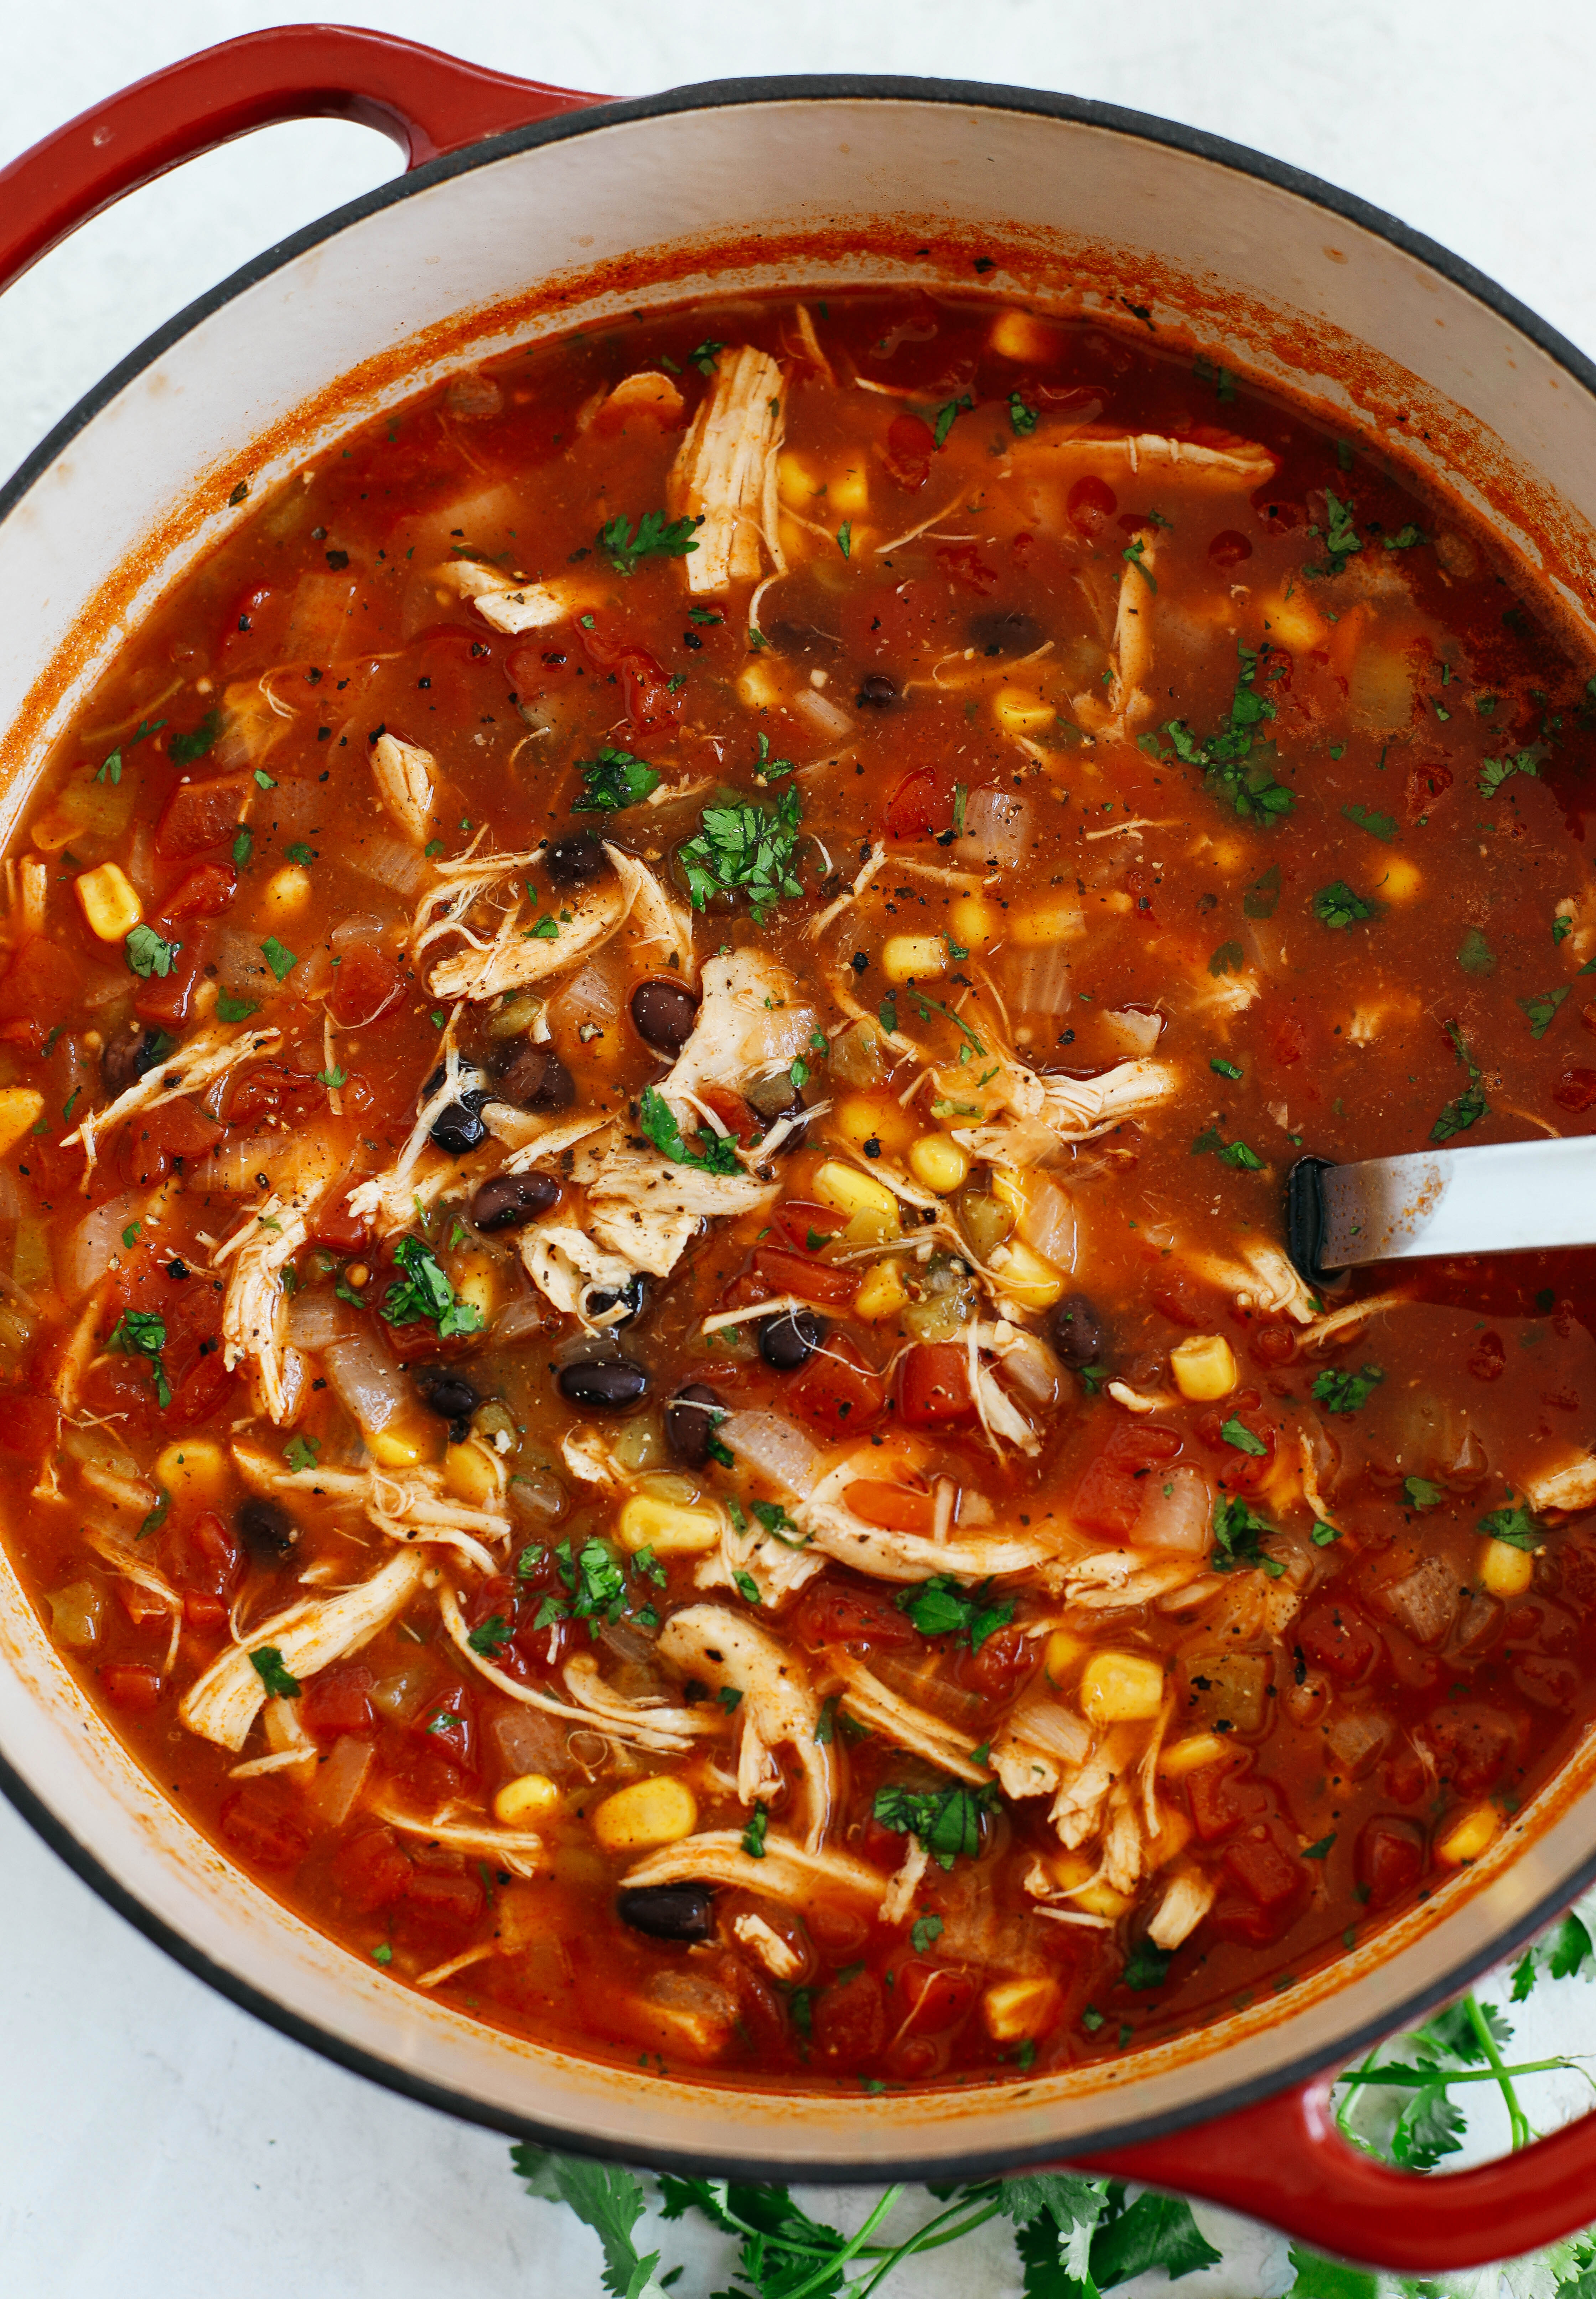 Healthy Chicken Tortilla Soup for the perfect weeknight meal that can easily be made in your instant pot, slow cooker or even right on the stove!